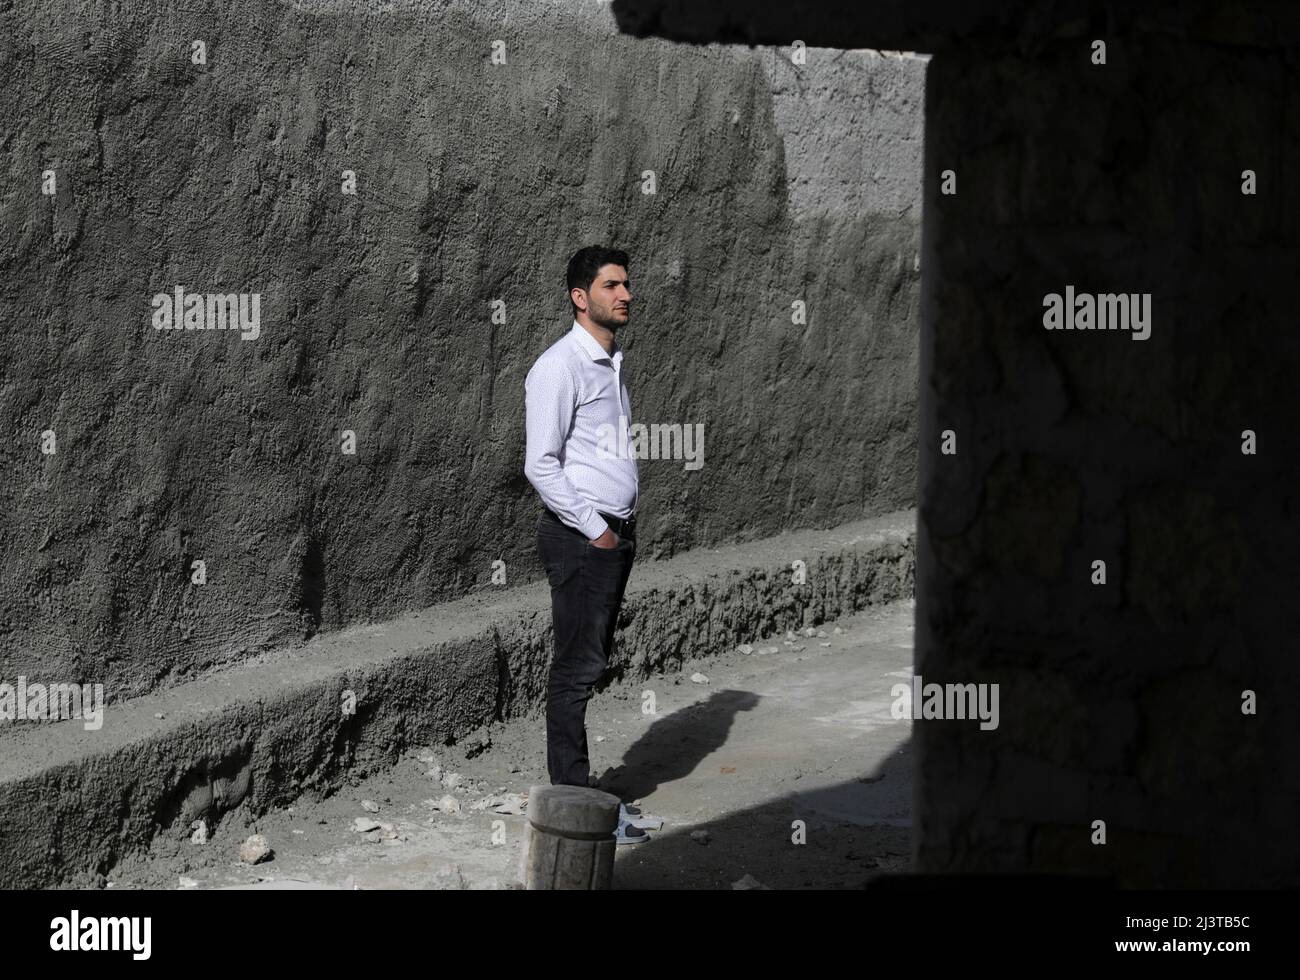 Abdel Hamid al-Youssef, an internally displaced man who says his wife and infant twins were killed when poison gas was dropped on their home town of Khan Sheikhoun in 2017, stands outside his house in the rebel-held town of Sarmada in Idlib province, Syria April 1, 2022. Picture taken April 1, 2022. REUTERS/Khalil Ashawi Stock Photo